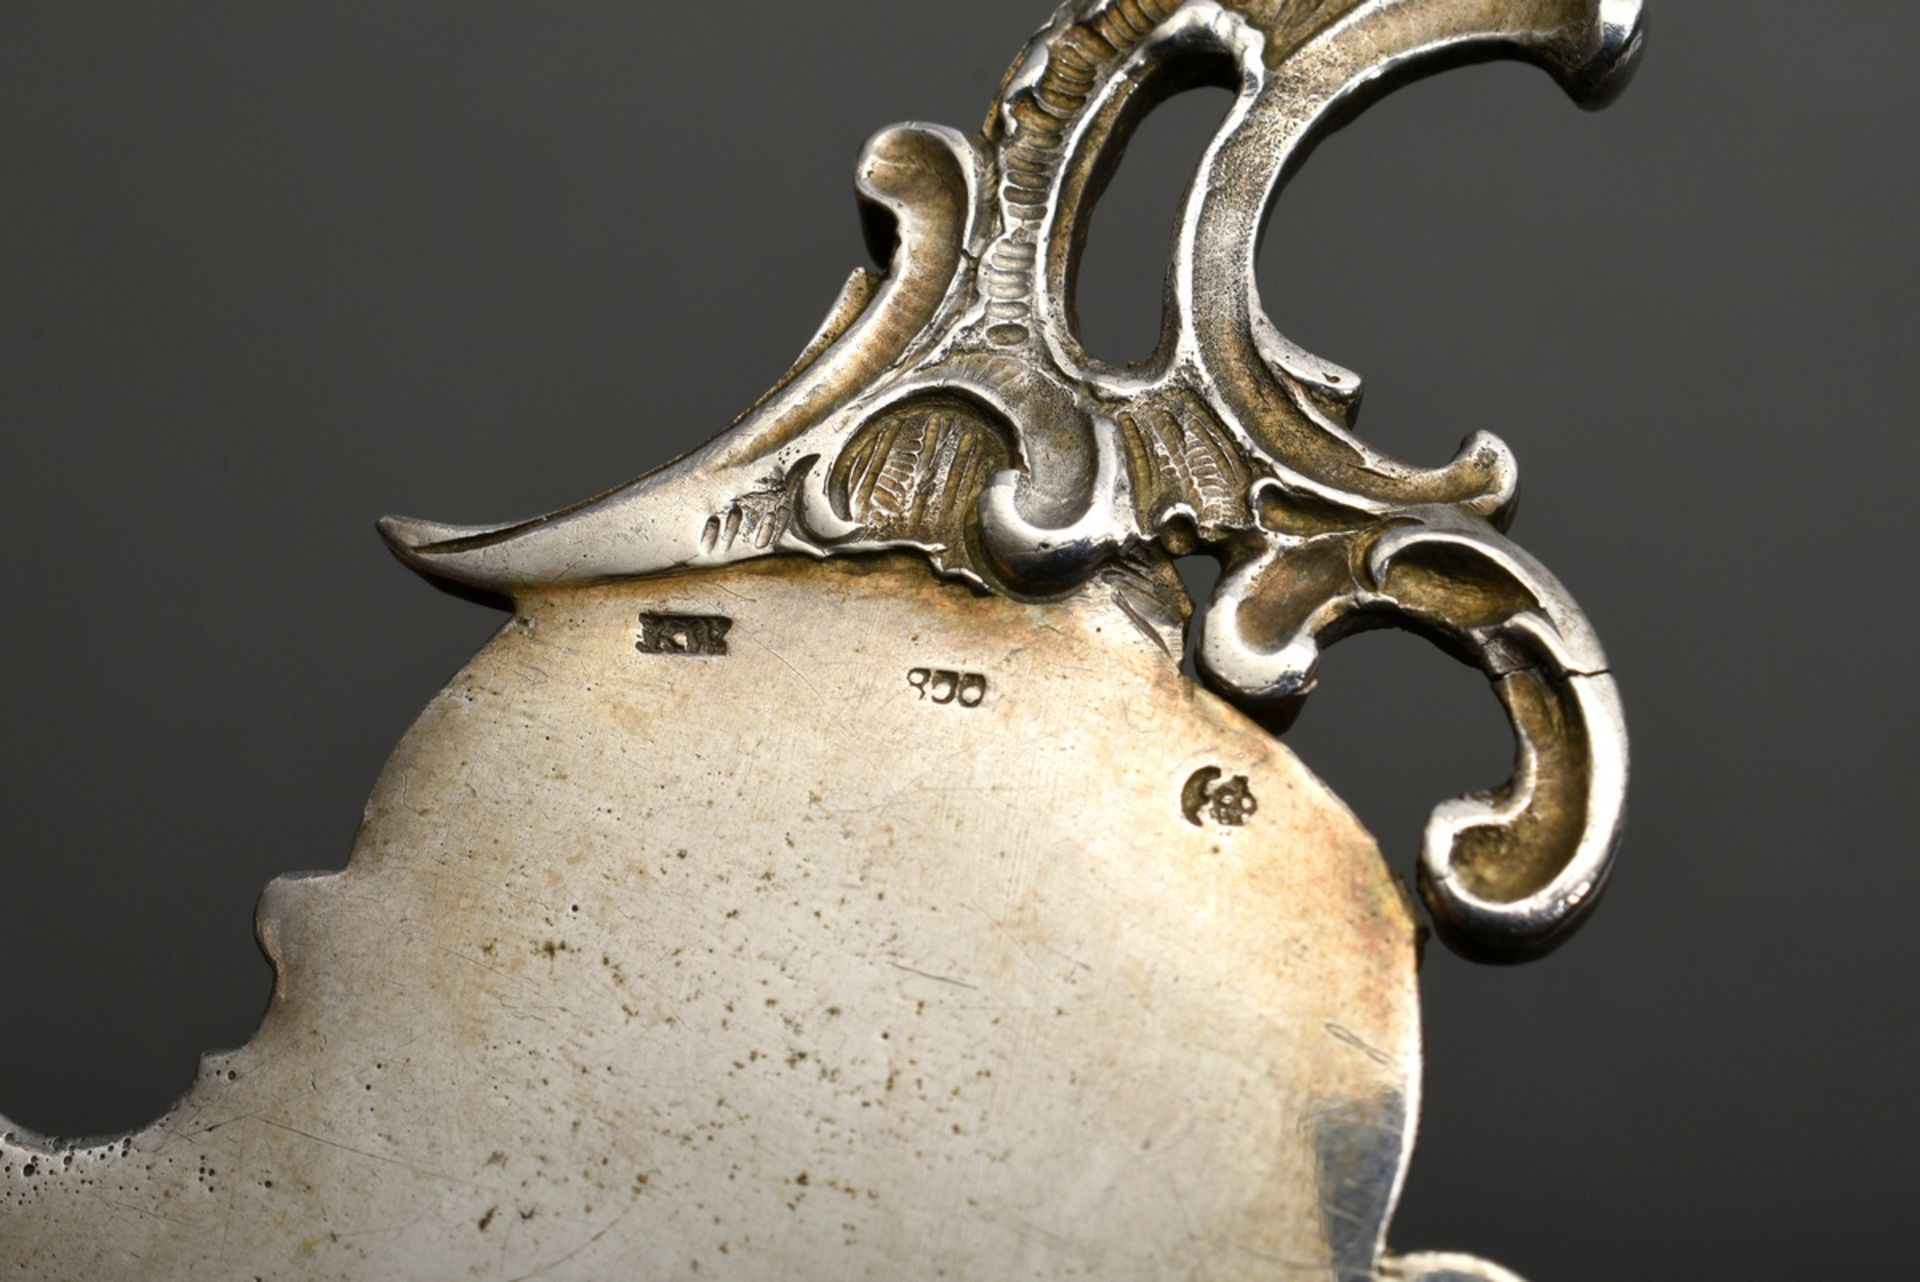 2 Pieces opulent Neo-Rococo fish serving cutlery with sculptural figurative handles and fish relief - Image 4 of 6